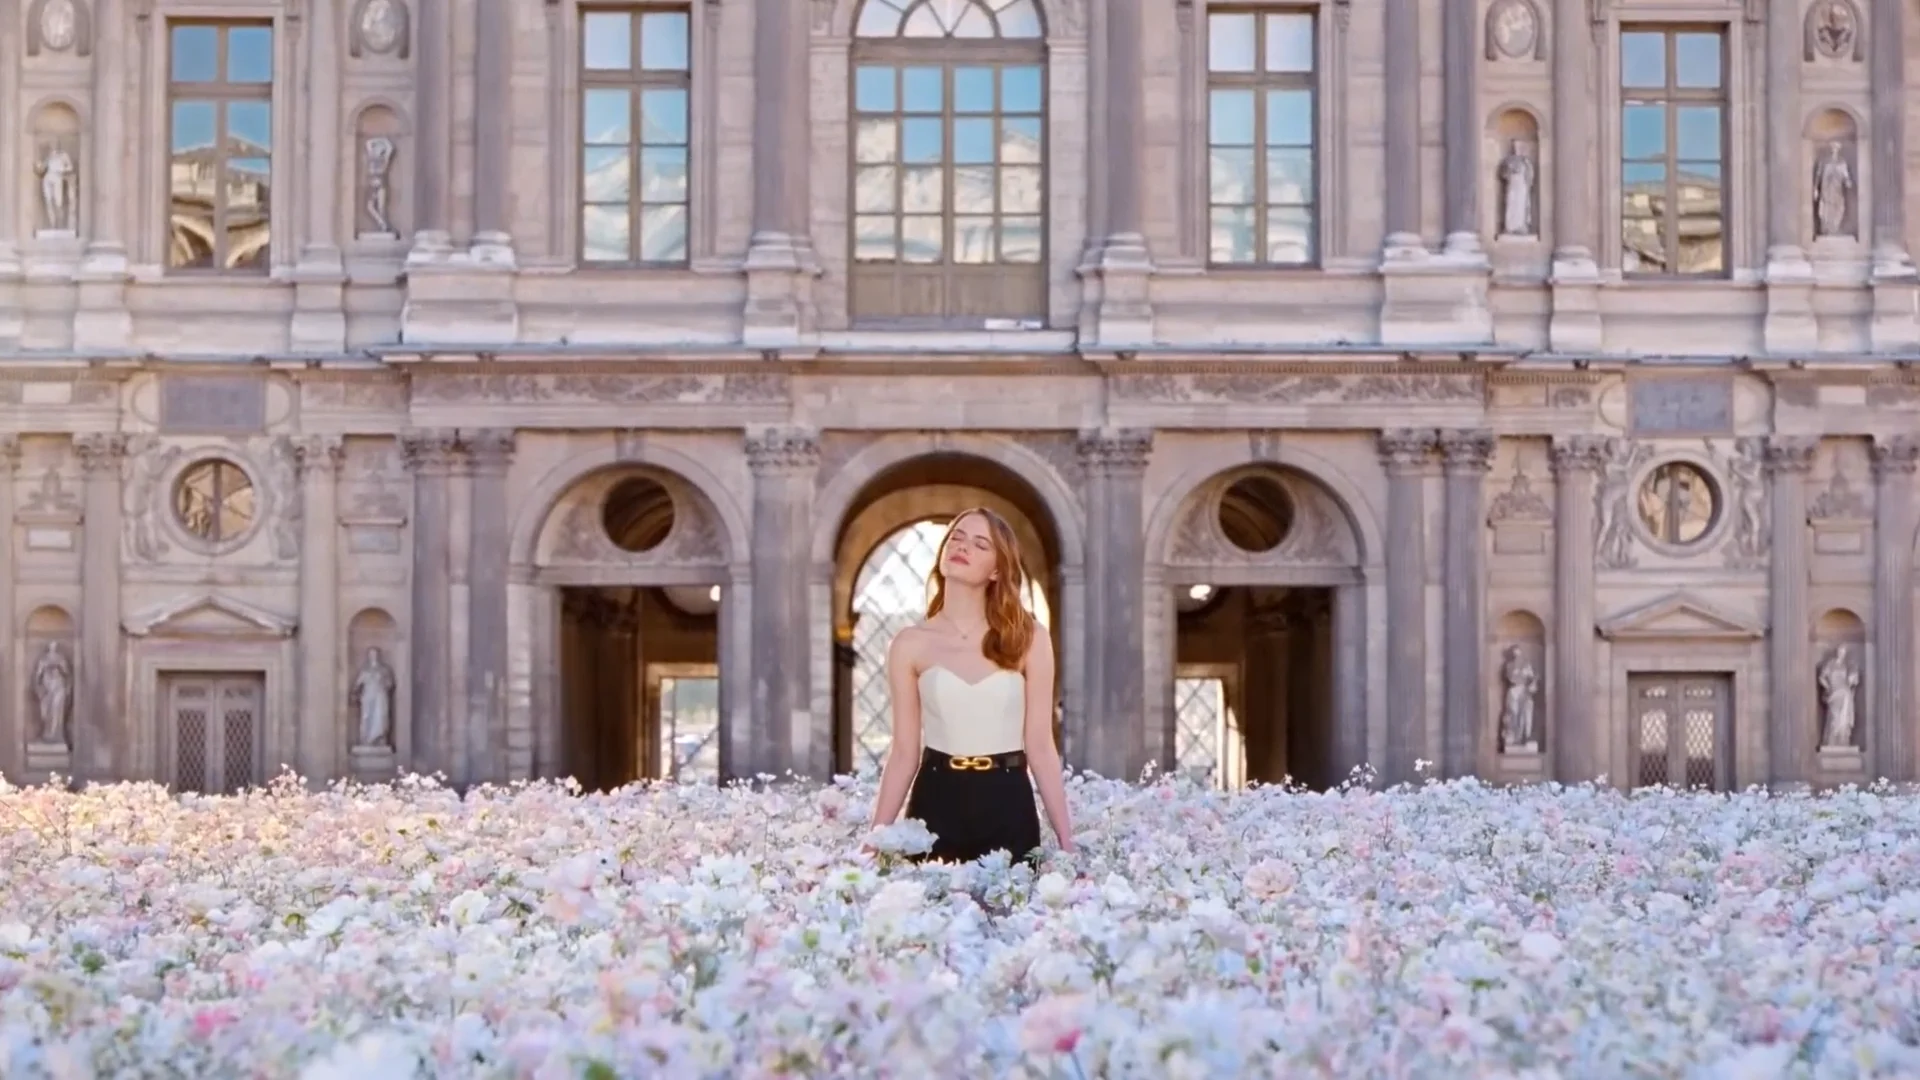 Emma Stone Is in Full Bloom for Louis Vuitton 'Coeur Battant' Ad